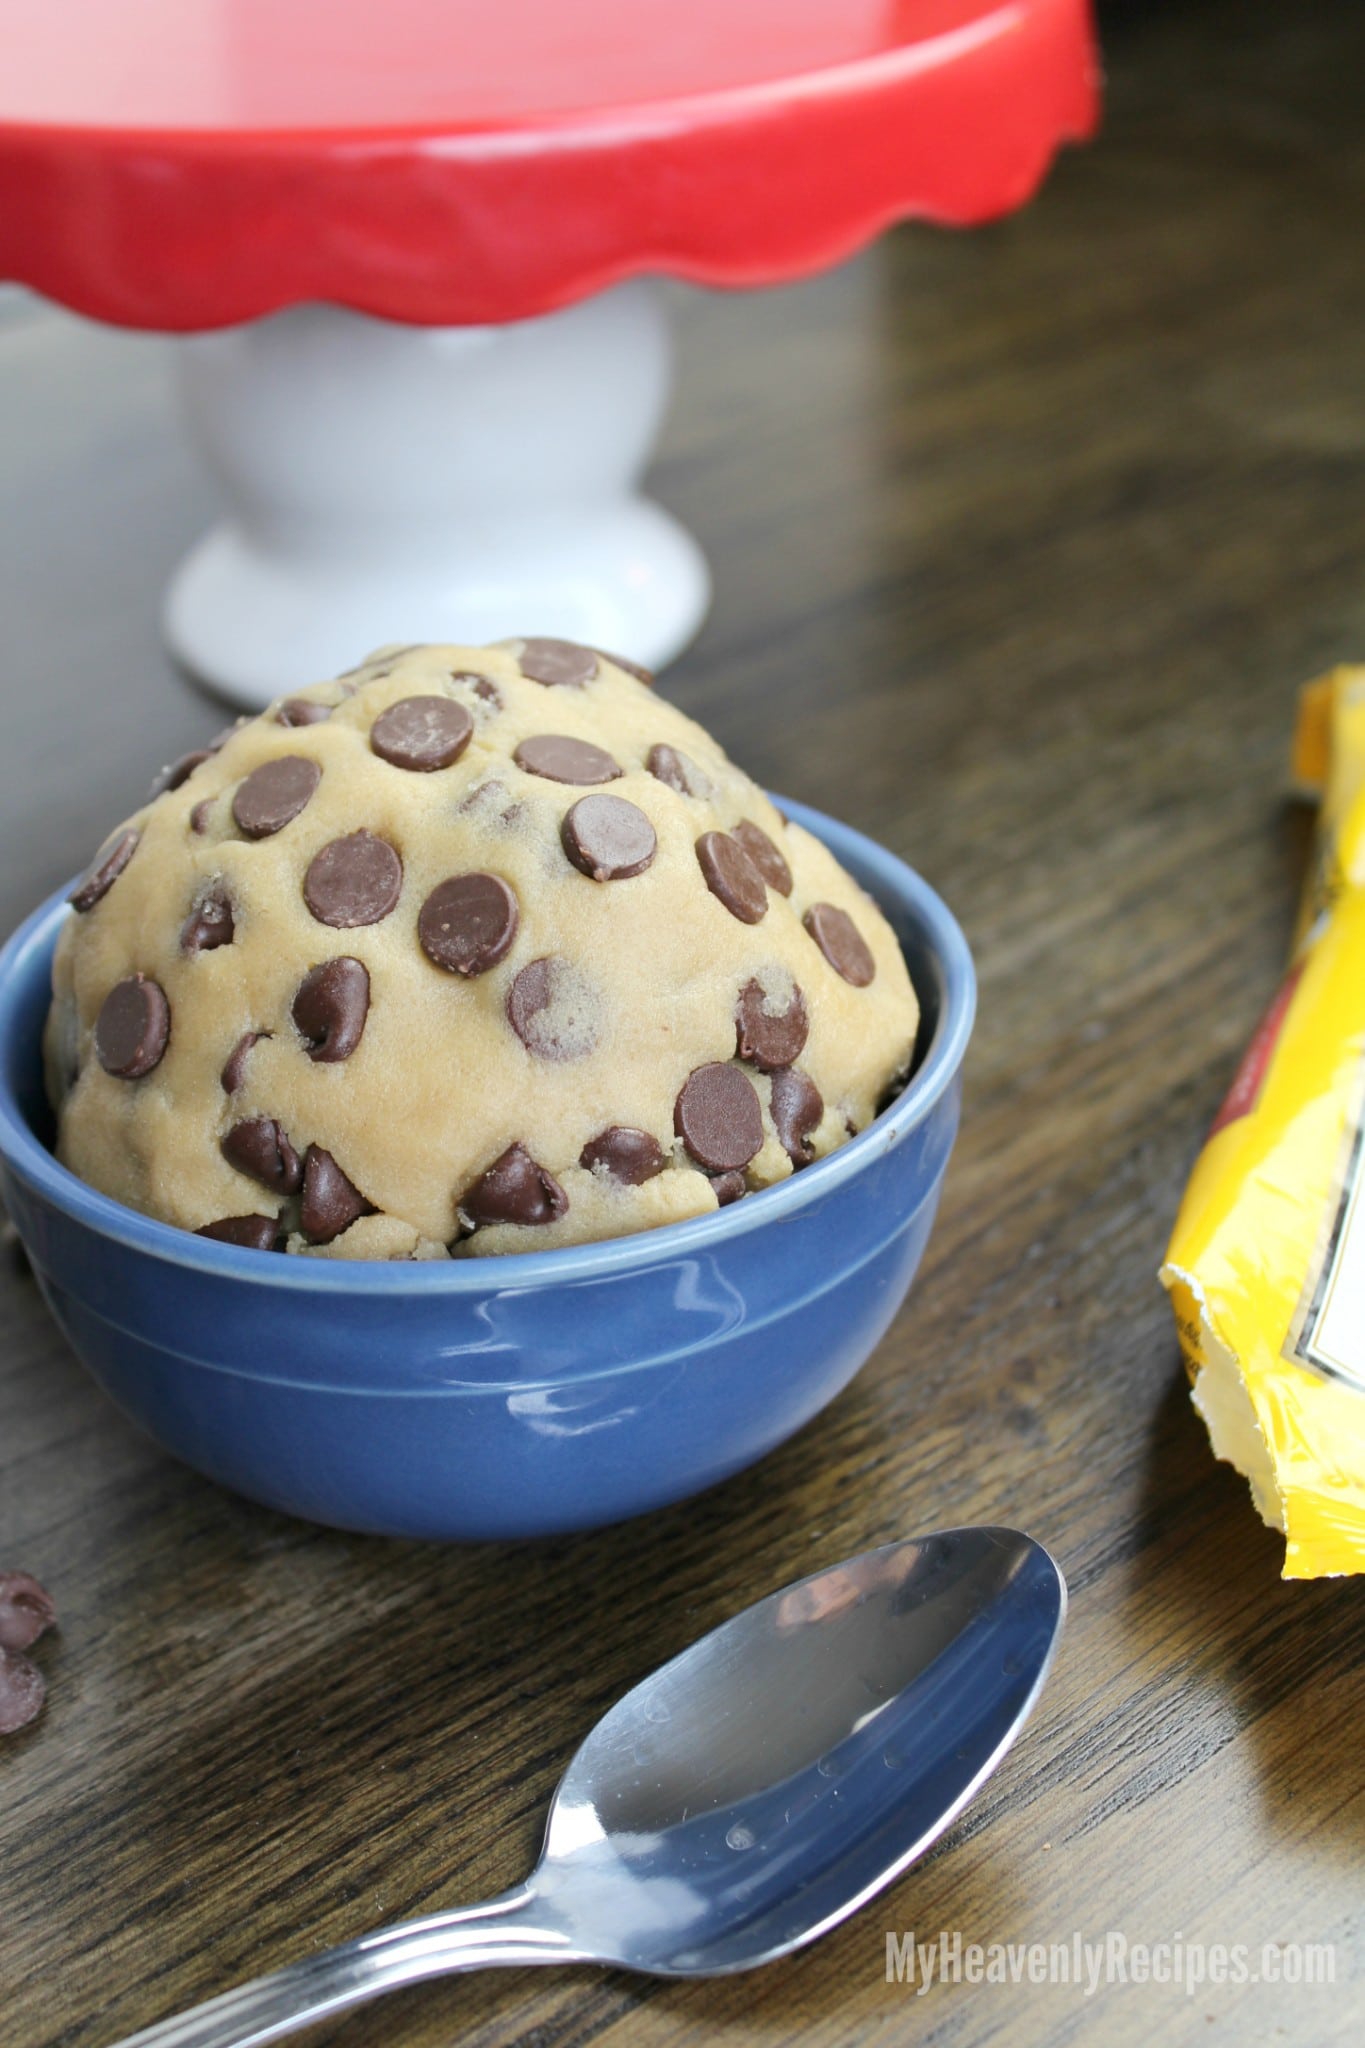 Chocolate Chip Cookie Dough in a small blue bowl